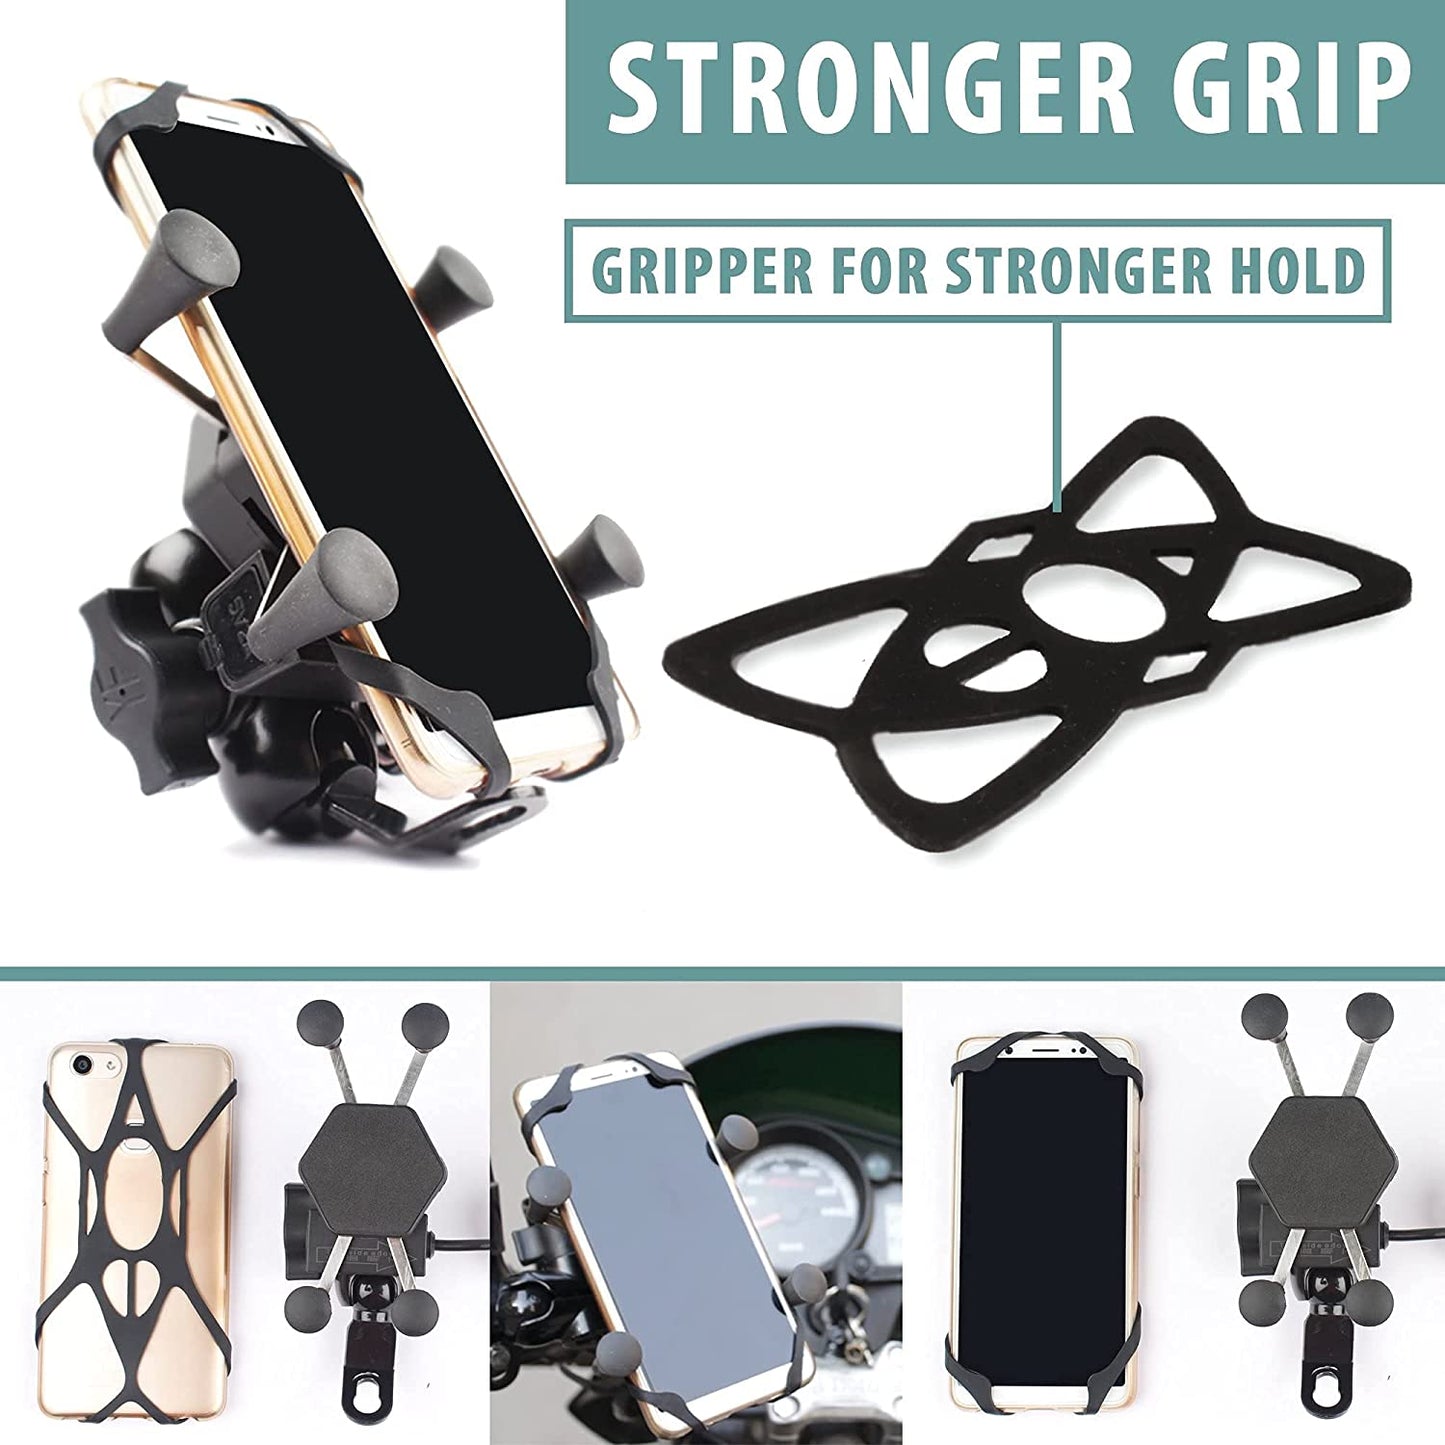 X-Grip Premium Bike Mobile Charger & Phone Holder Bike Mobile Holder Version 2 for All Bikes Scooters